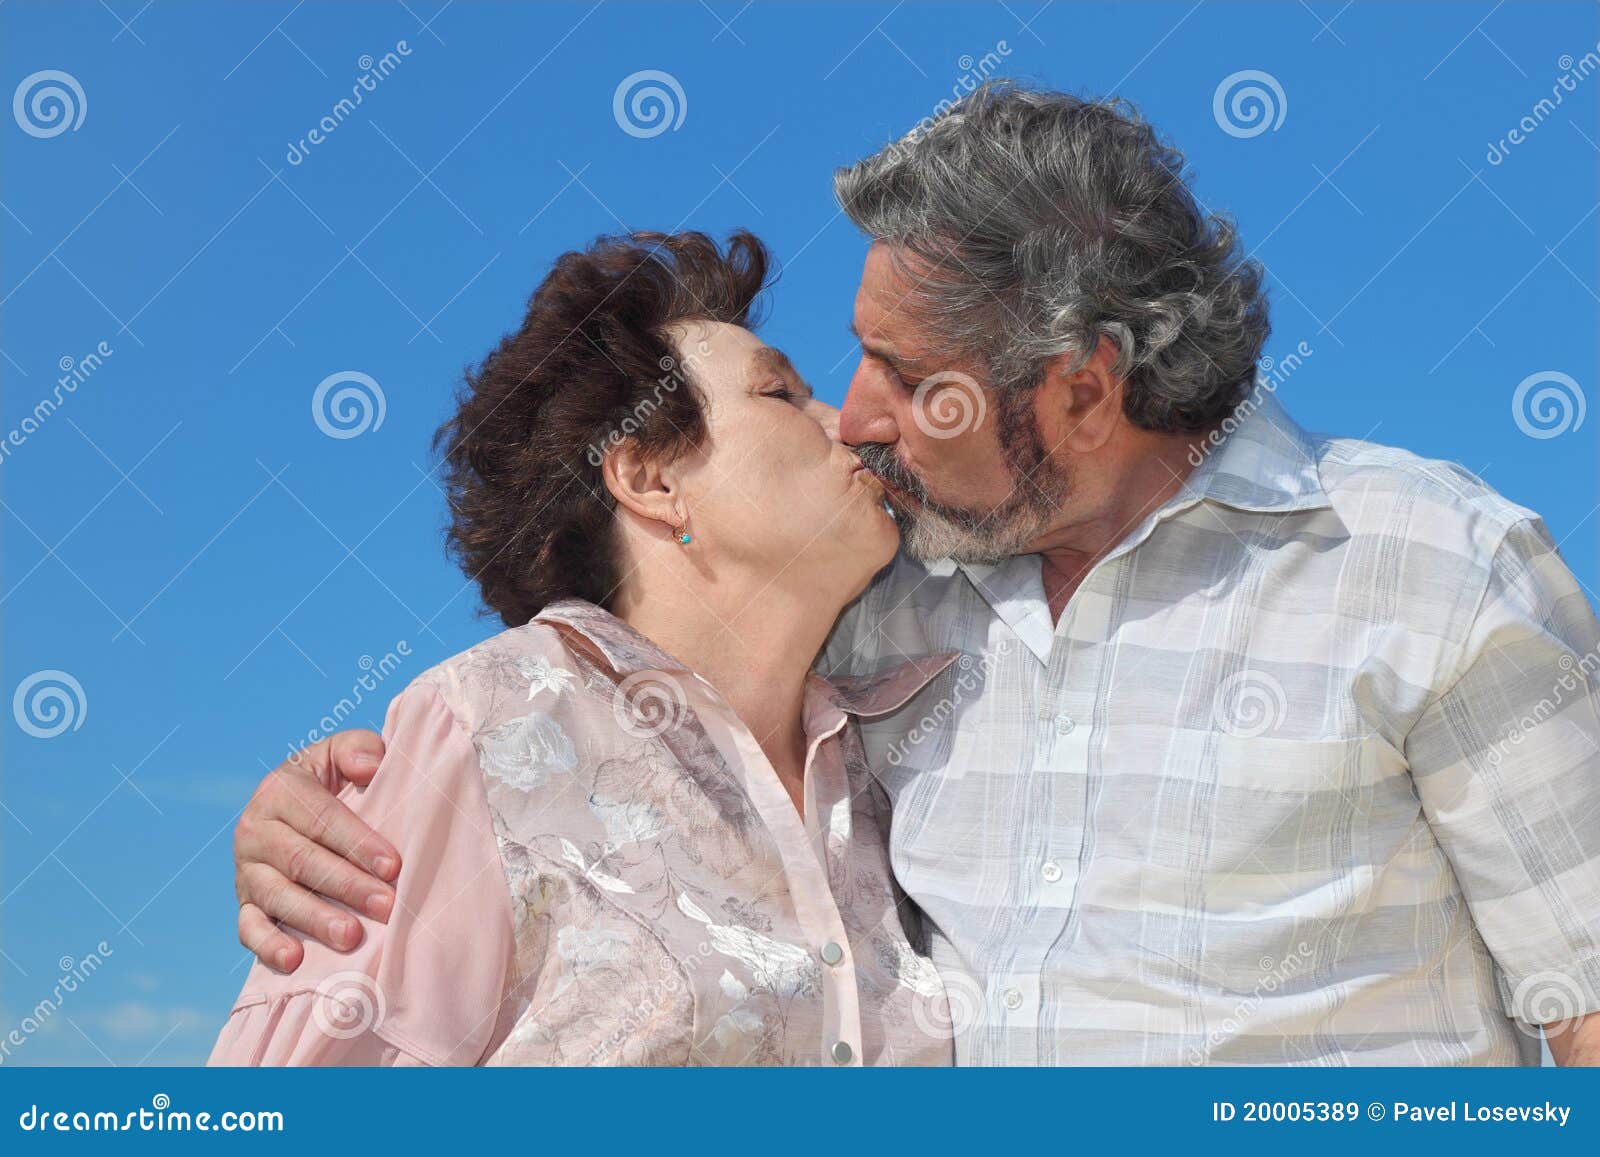 Old young kissing-pics and galleries